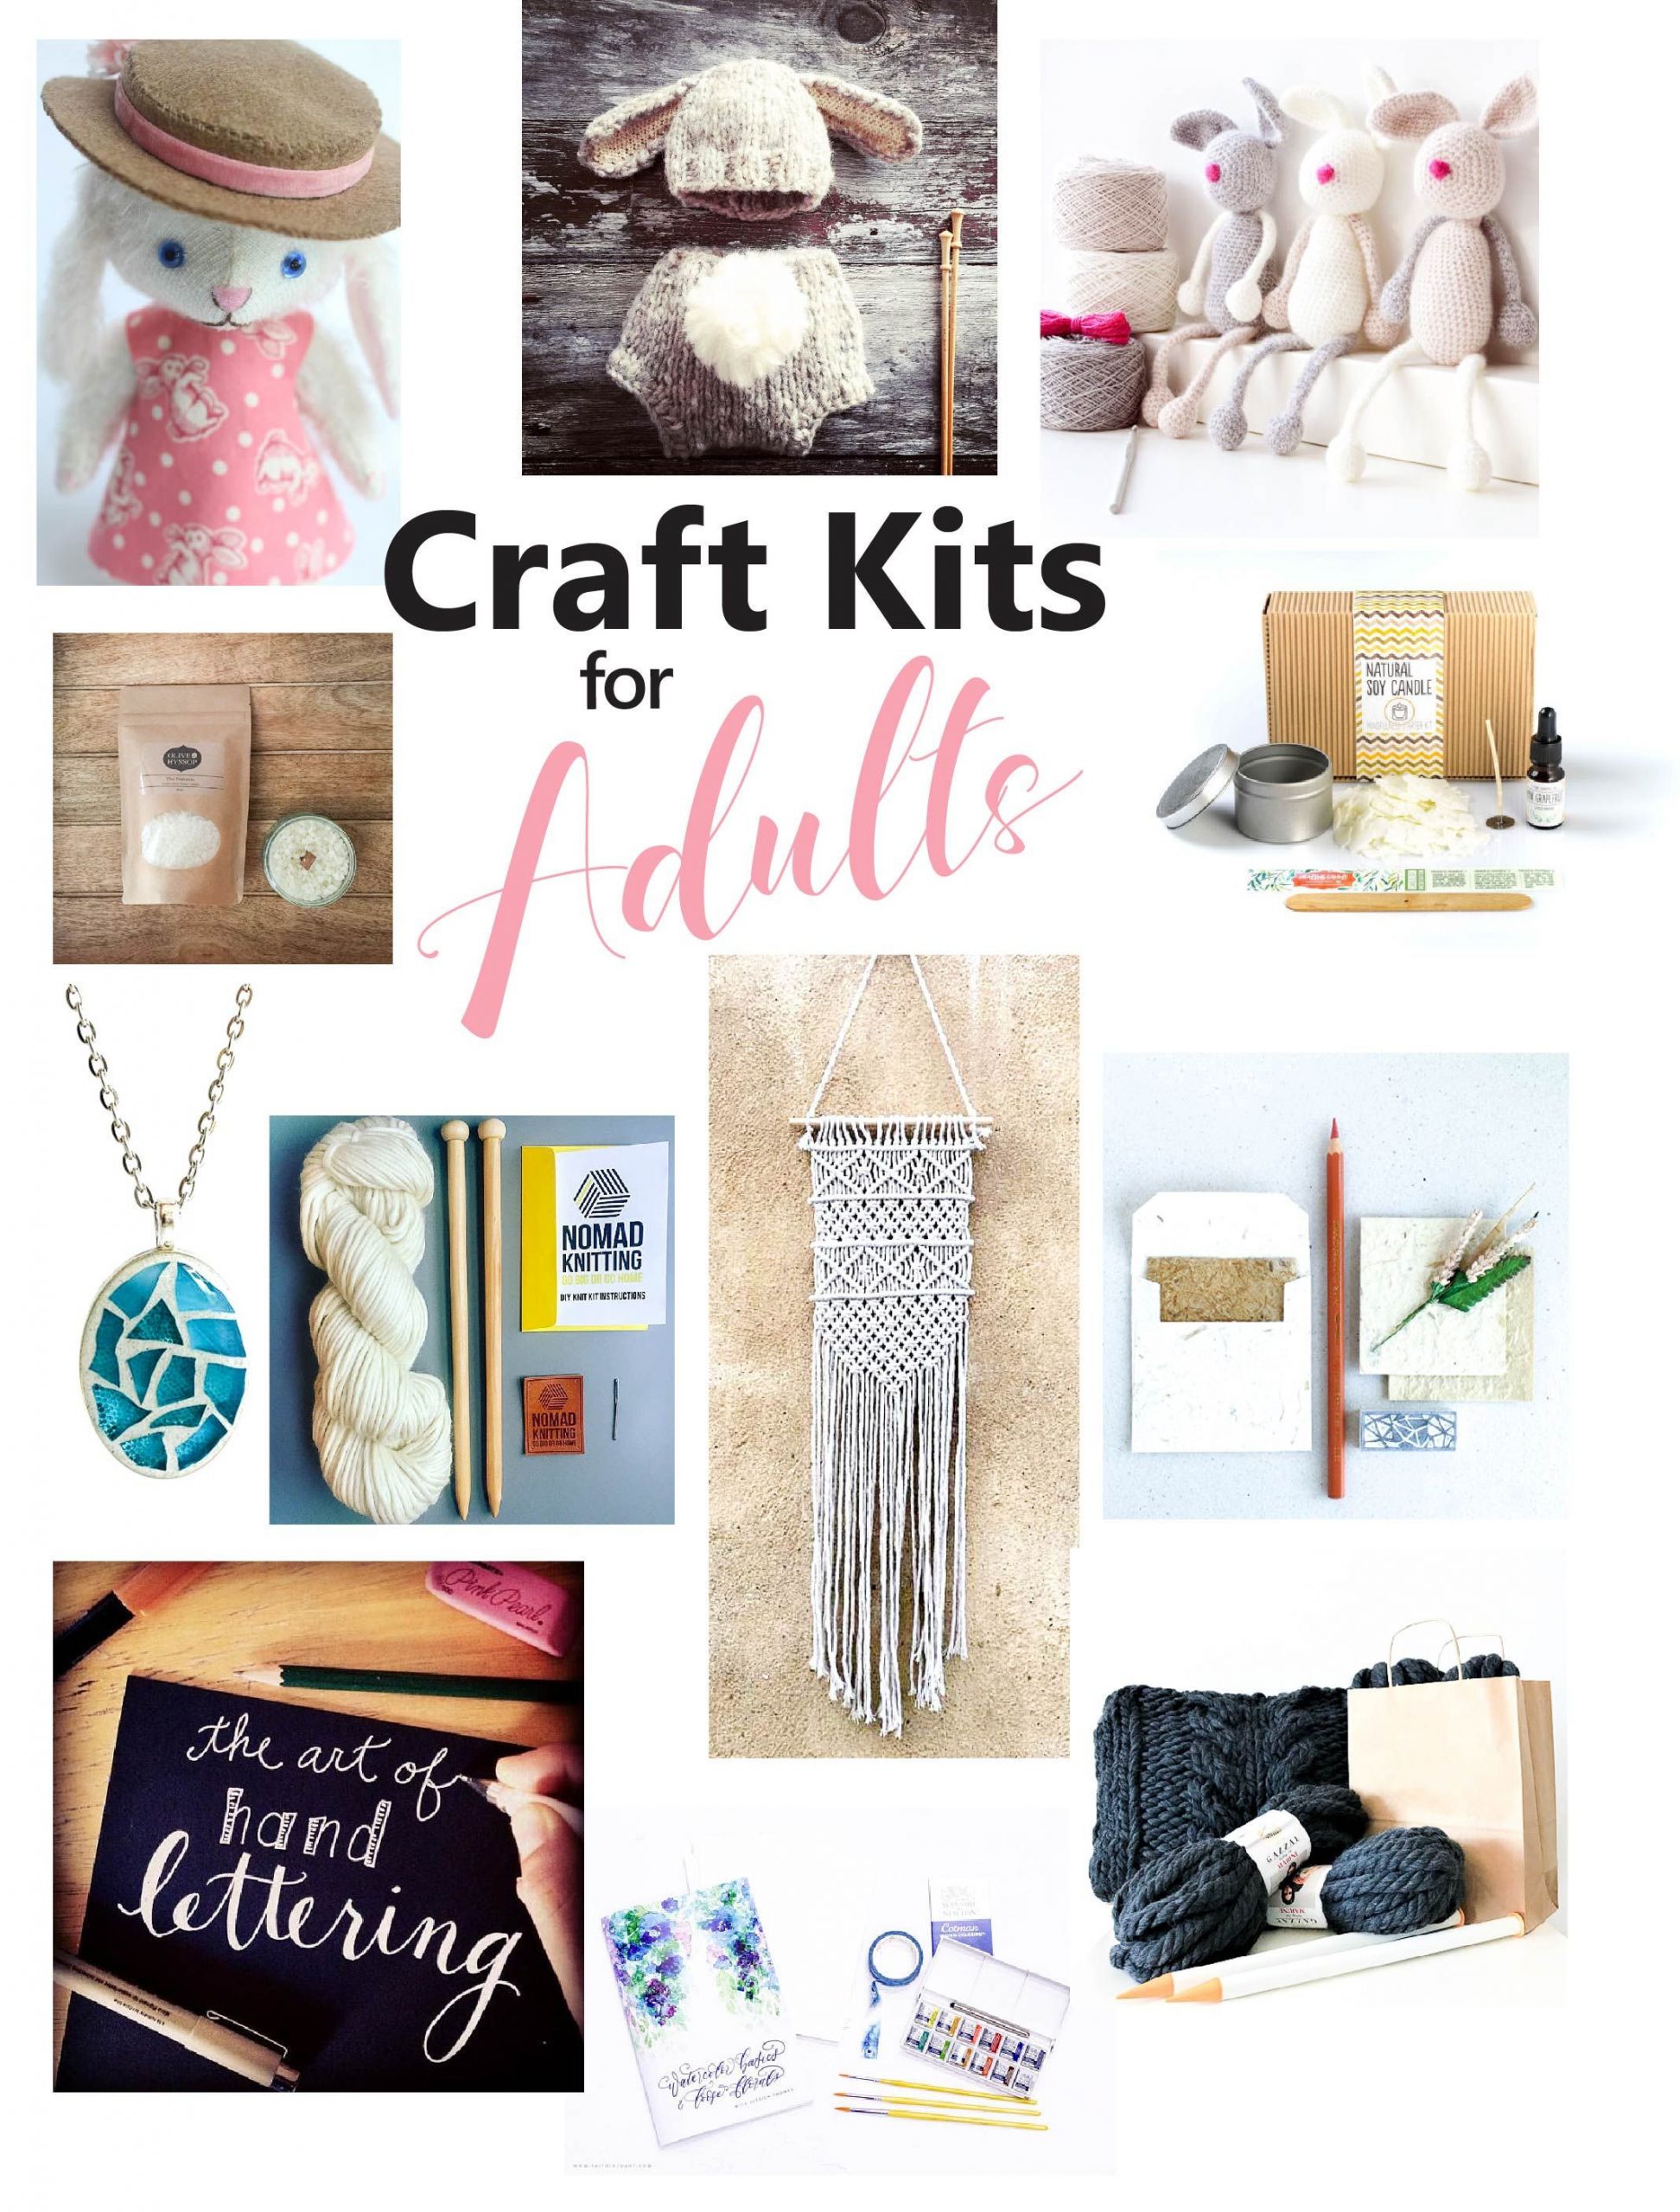 Paper Craft Kits For Adults
 The Best Craft Kits for Adults